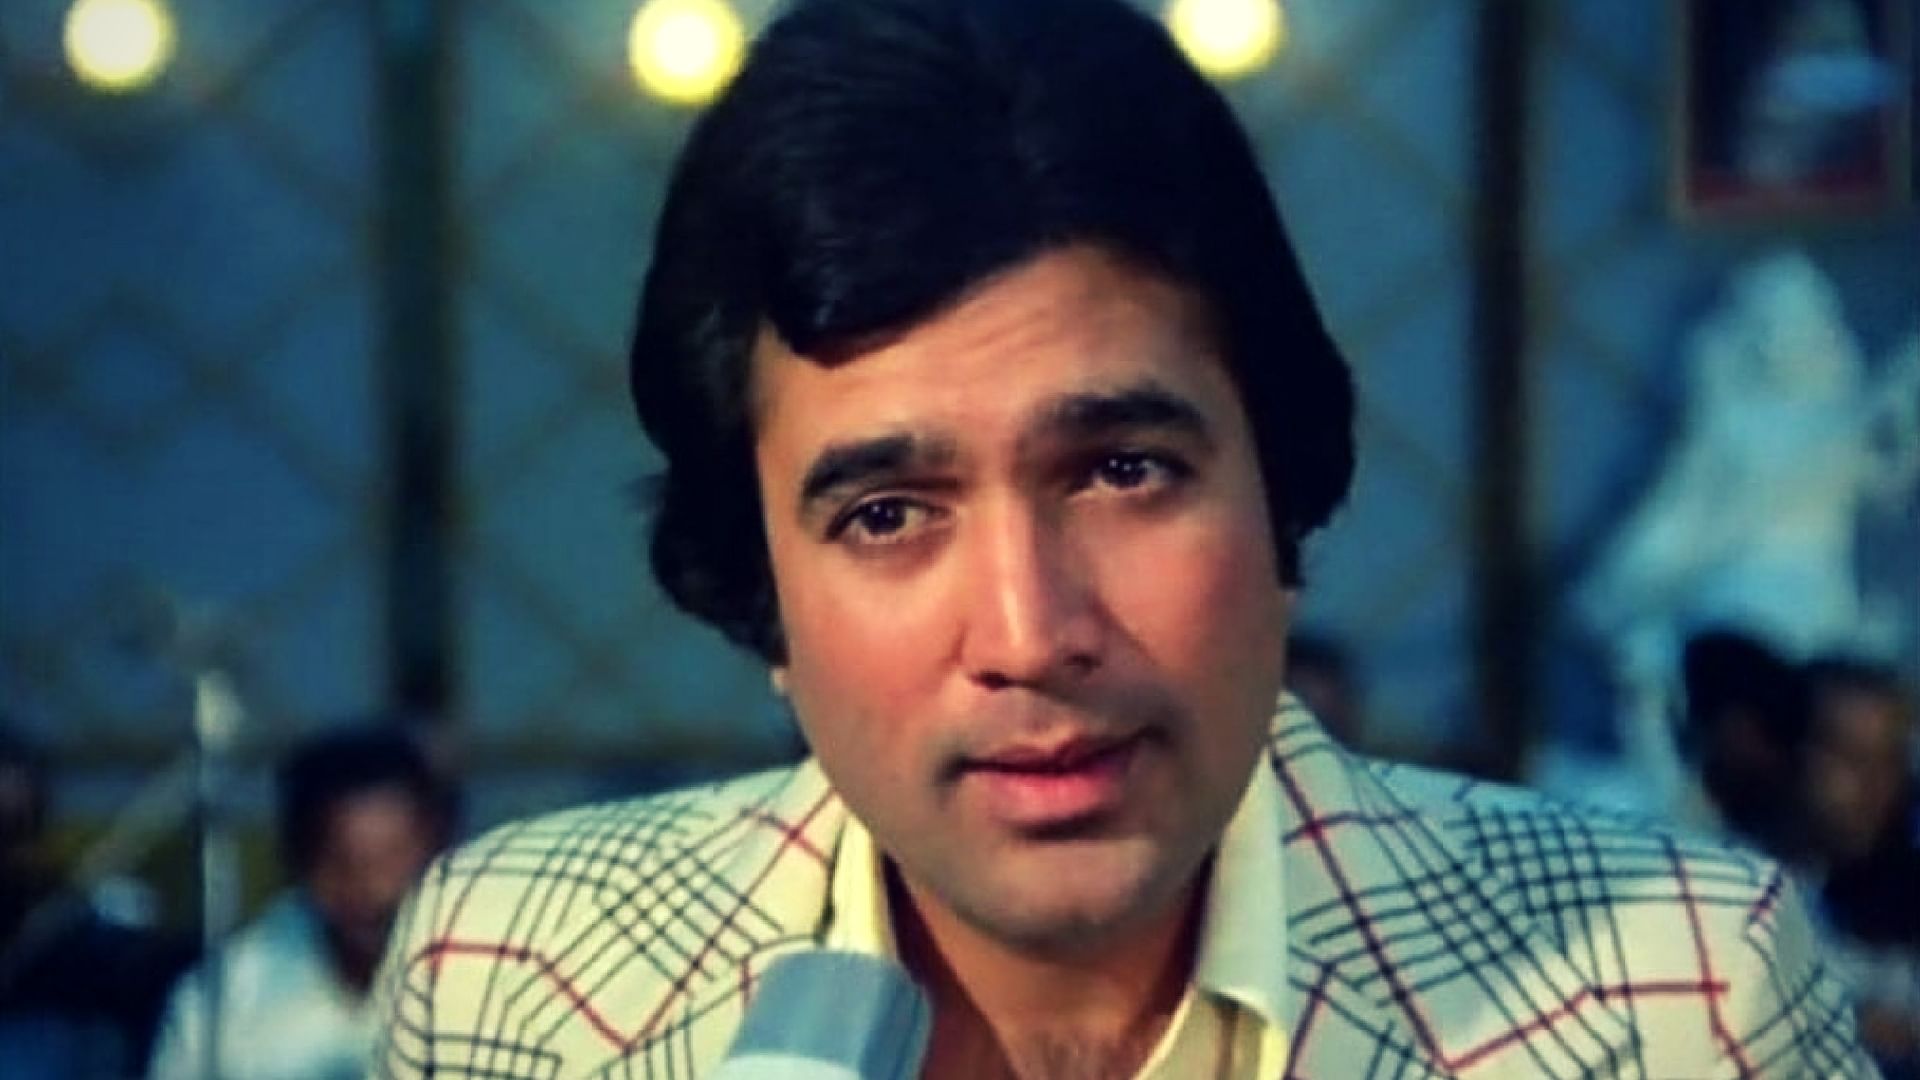 Remembering Rajesh Khanna with his most popular love songs on the megastar’s third death anniversary. (Photo courtesy: YouTube)